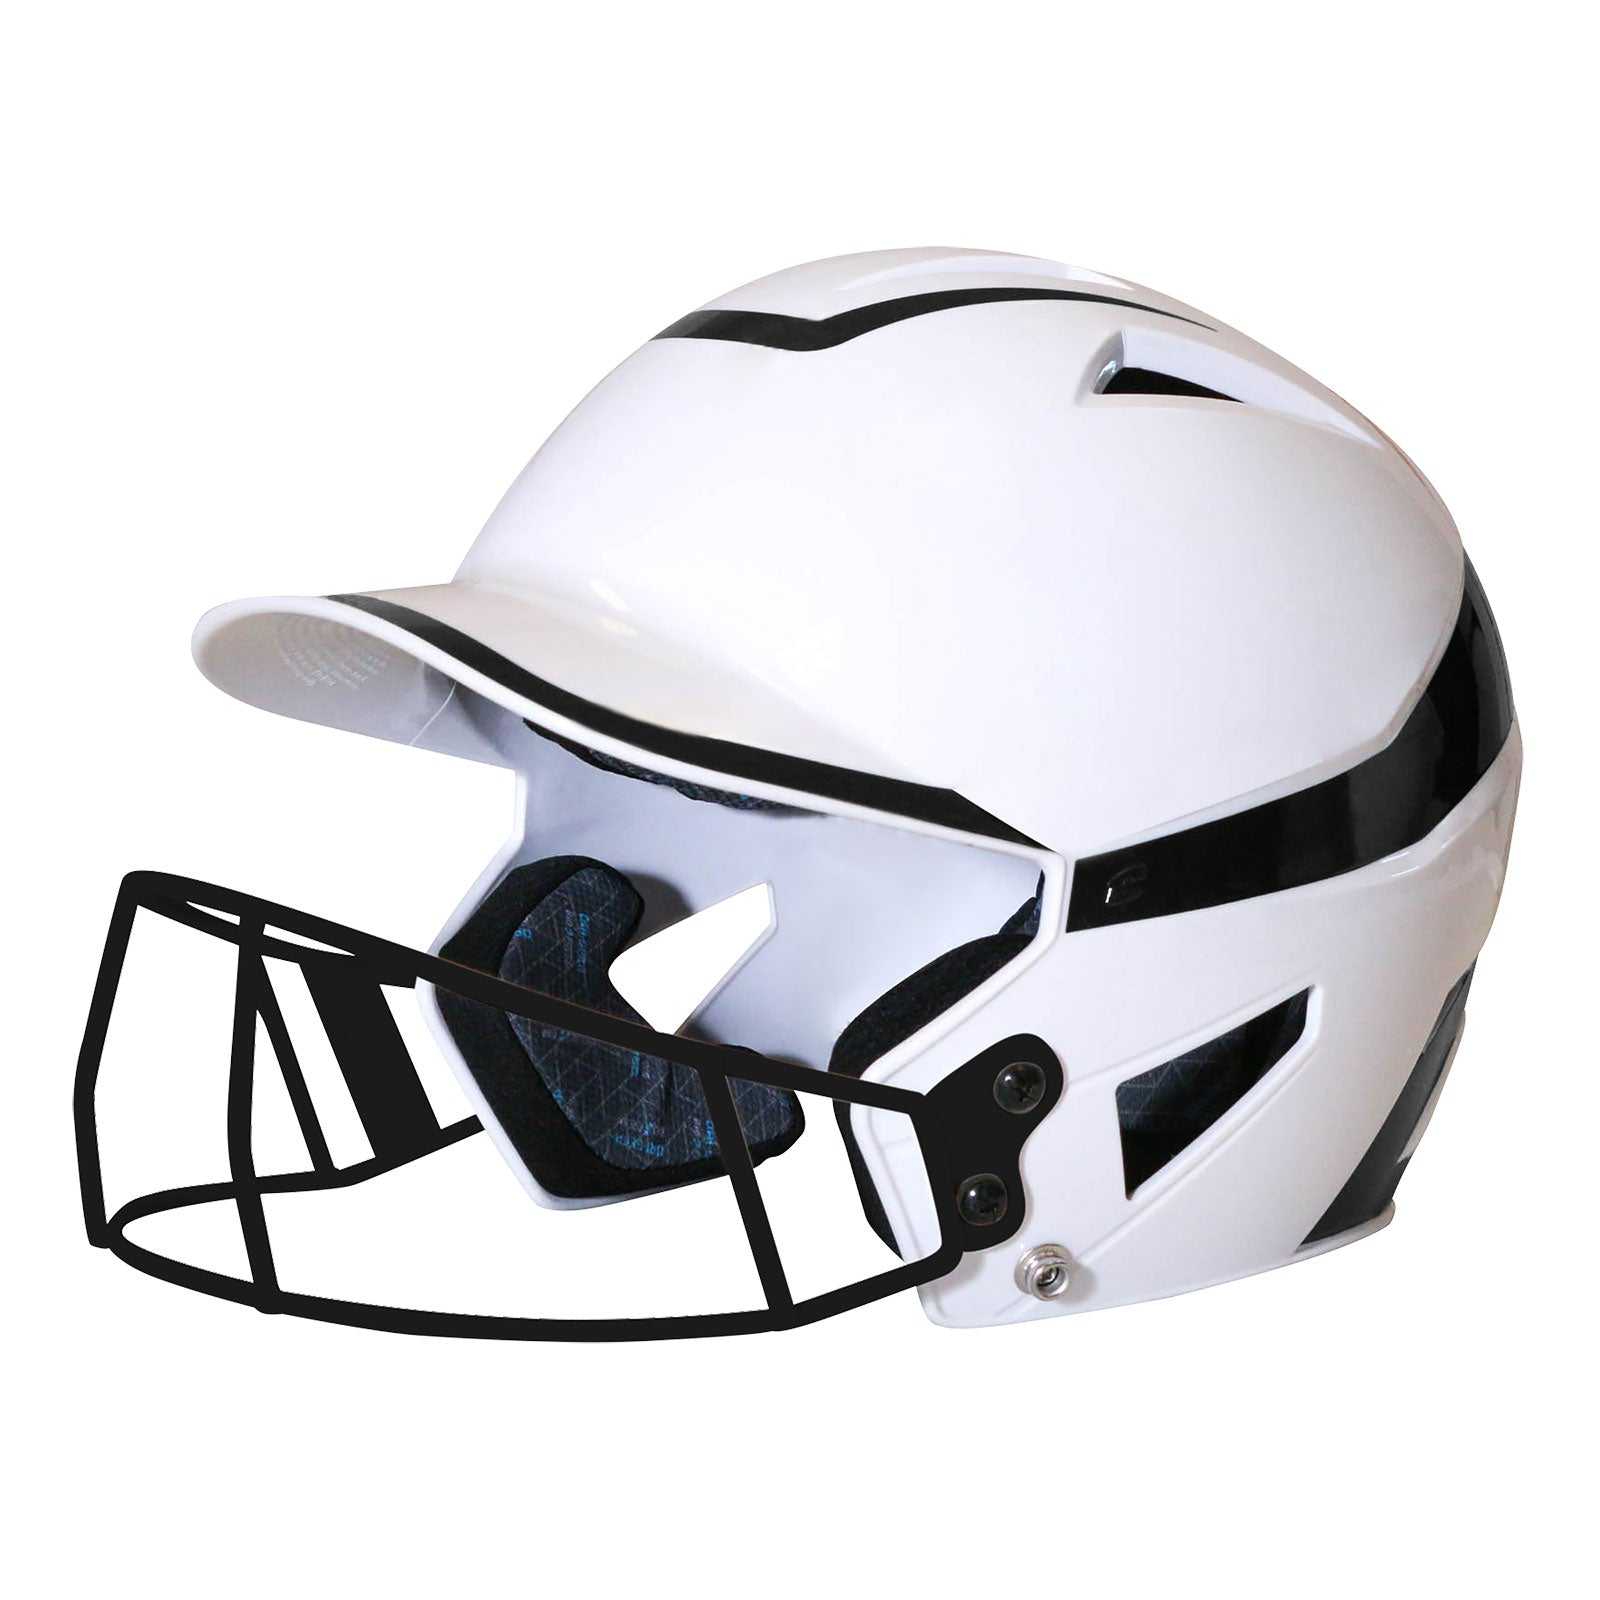 Champro HXFPG2 HX Rise Pro Softball Helmet with Facemask - White Black - HIT a Double